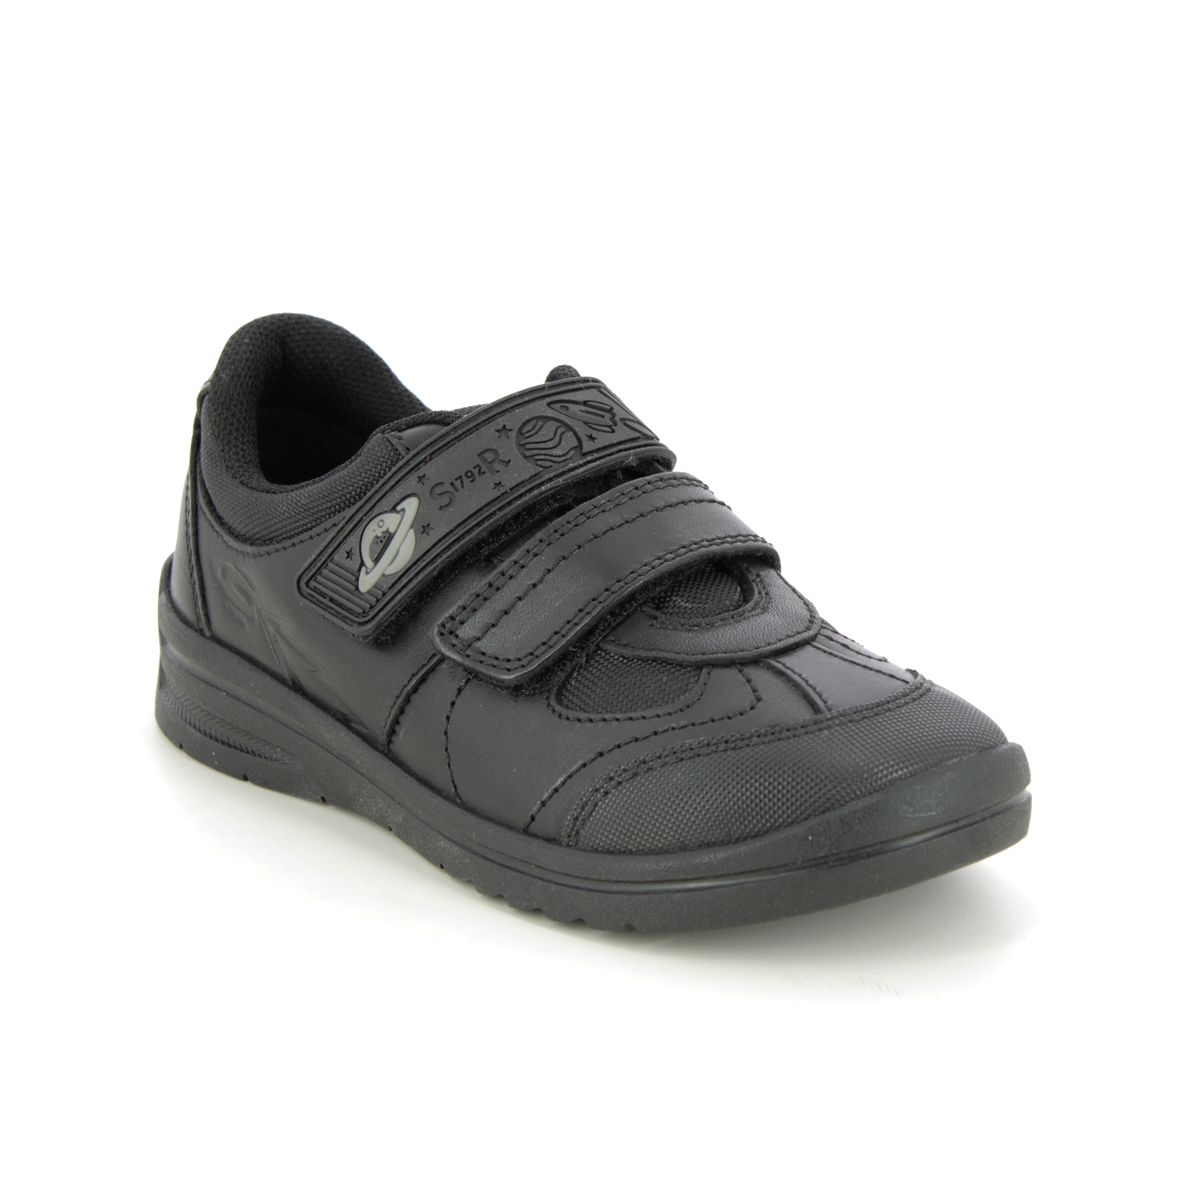 Start Rite - Rocket 2V In Black Leather 2797-75E In Size 13 In Plain Black Leather For School Boys Shoes  In Black Leather For kids